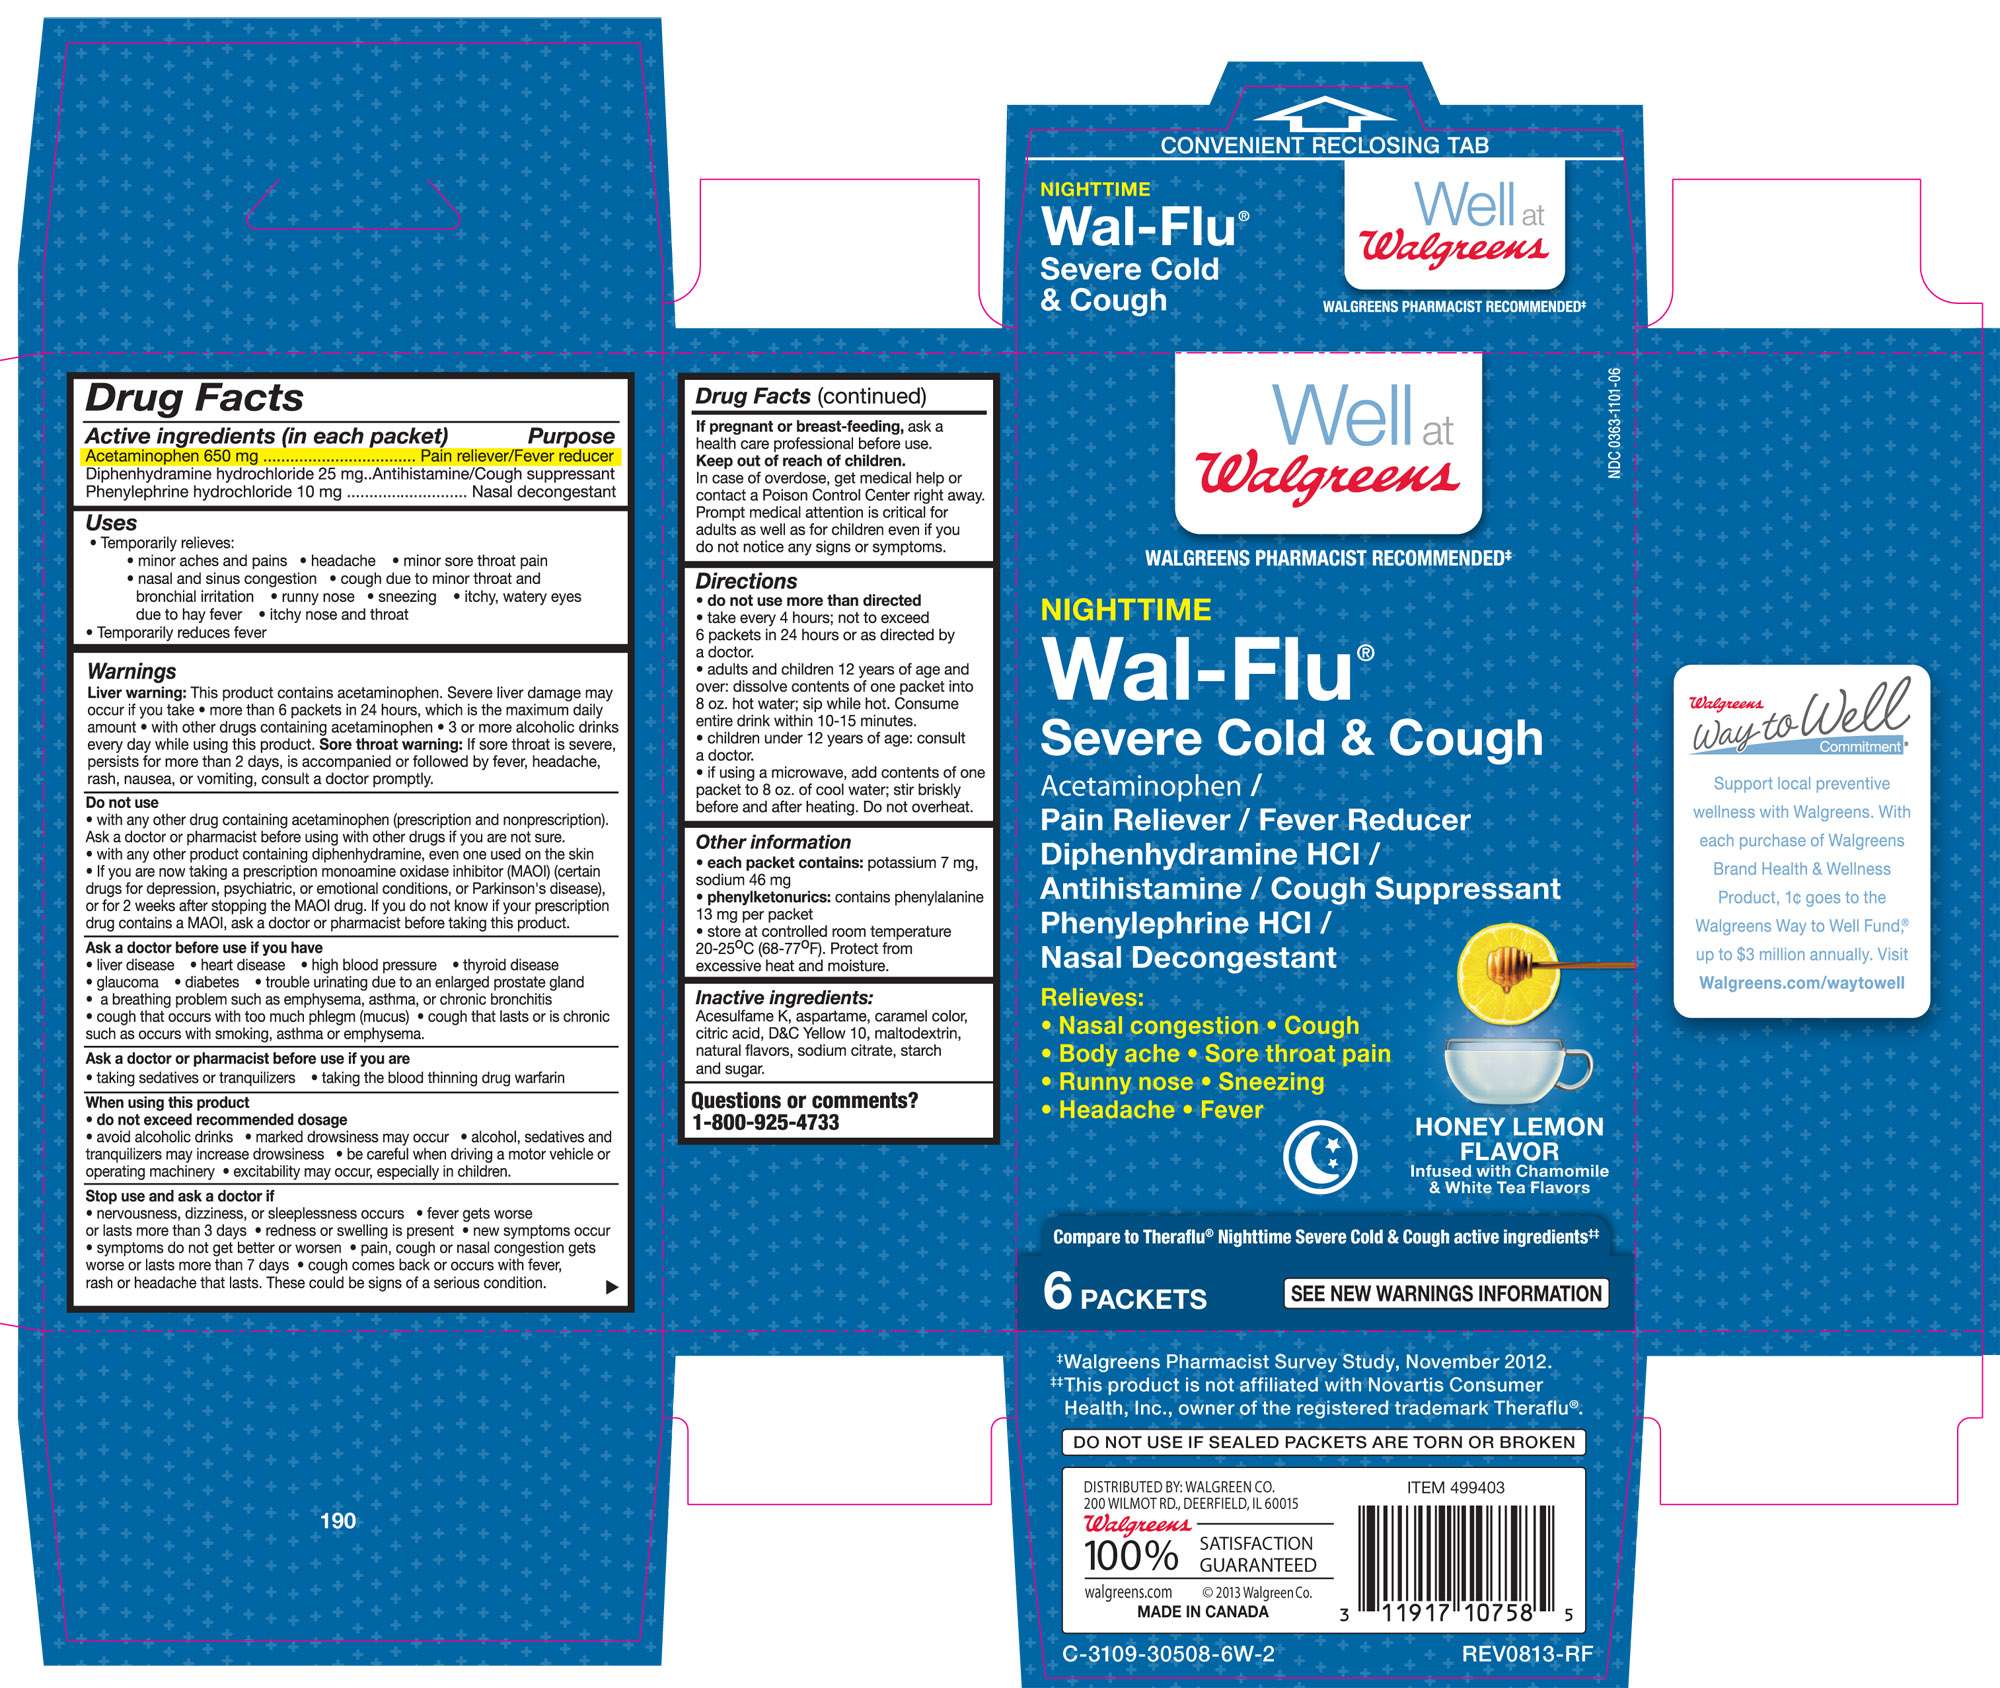 Walgreens night time wal-flu severe cold and cough